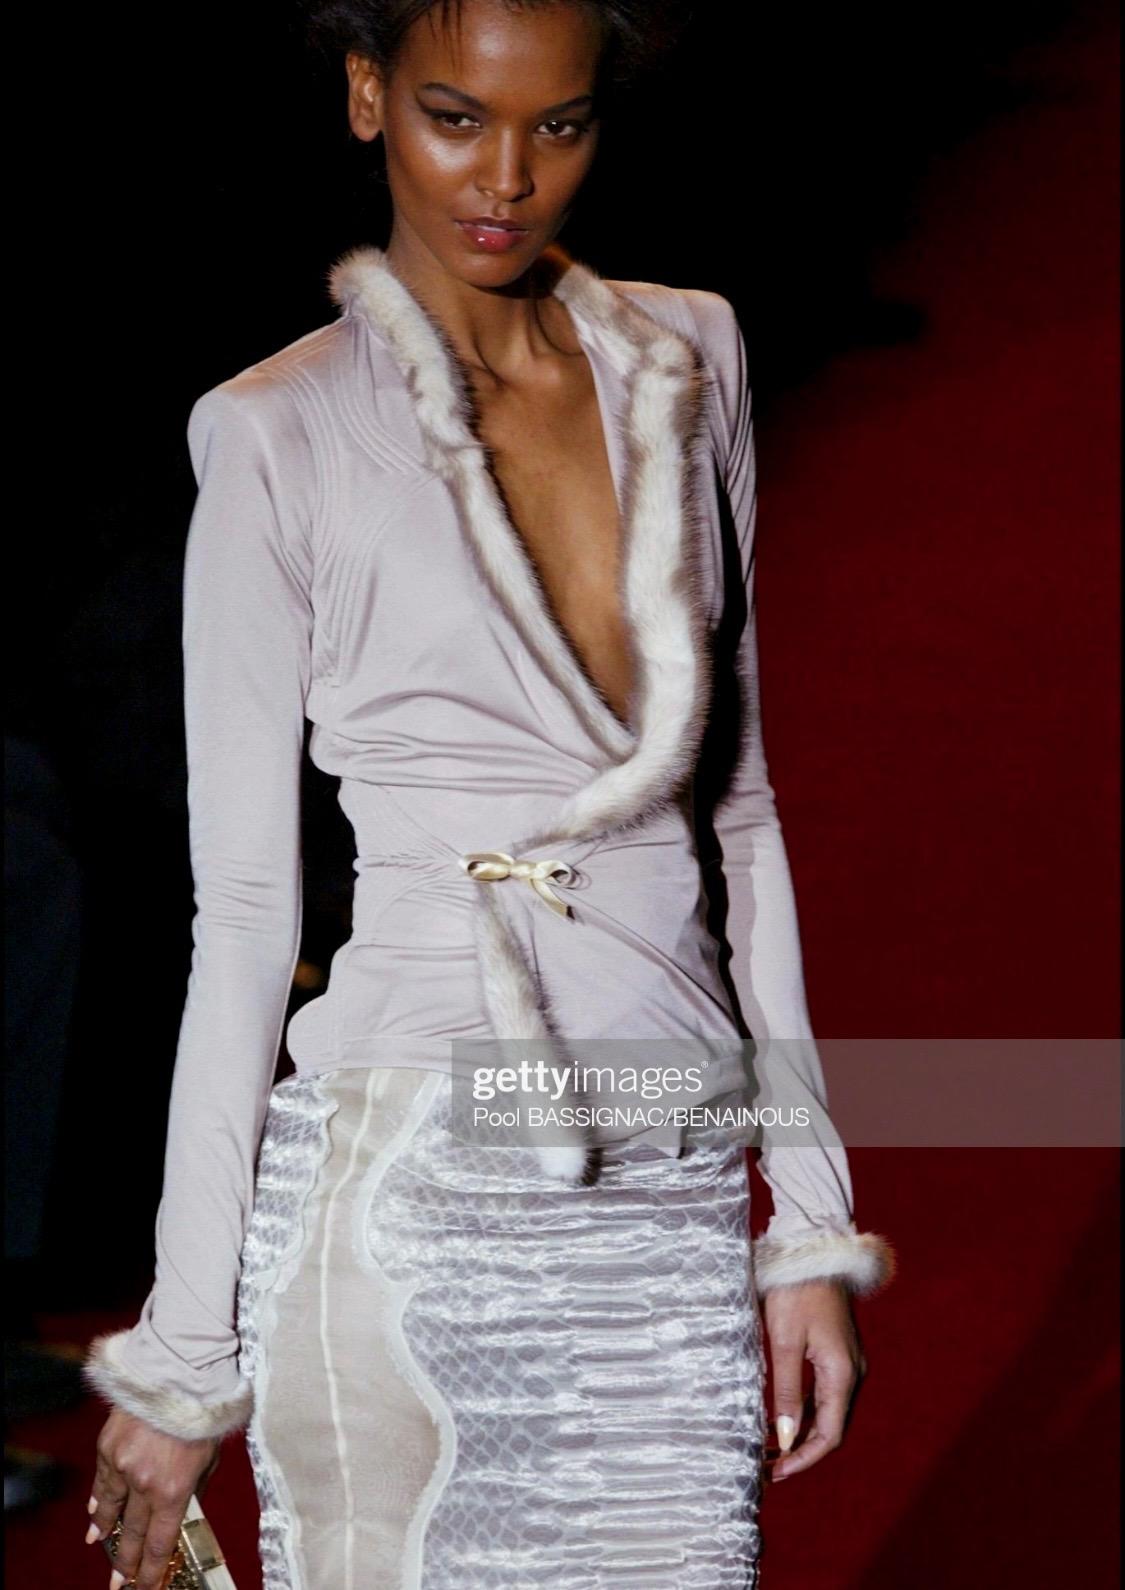 Presenting a gorgeous sleeveless top designed by Tom Ford for Yves Saint Laurent Rive Gauche's Fall/Winter 2004 collection. A reference to Yves Saint Laurent's infamous Fall/Winter 1977 'Les Chinoises' collection, Ford's iconic Fall/Winter 2004